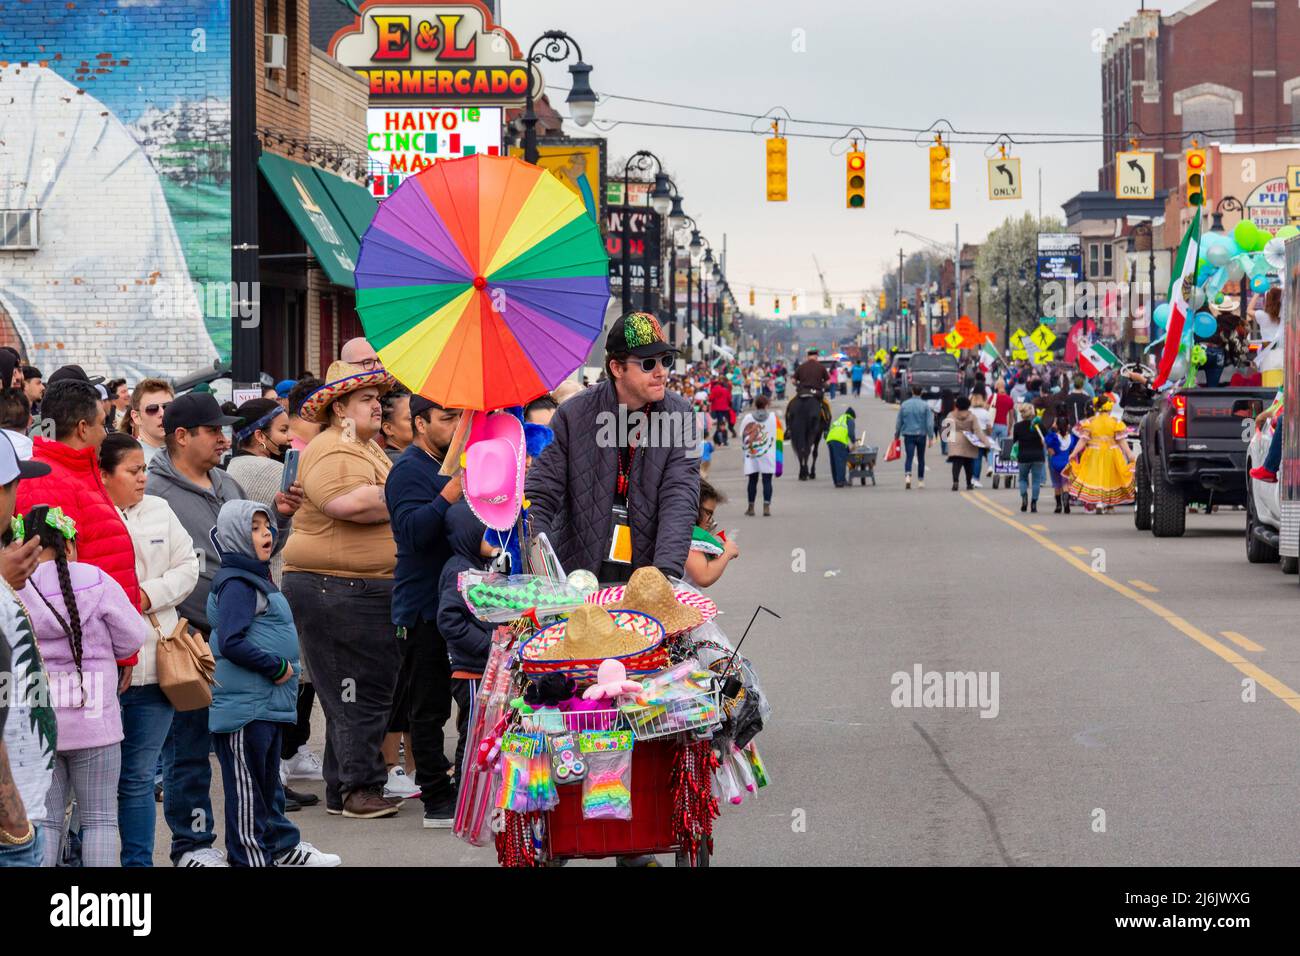 Detroit, Michigan USA - 1 May 2022 - A street vendor works the crowd as thousands lined Vernor Highway to watch the Cinco de Mayo parade in Detroit's Mexican-American neighborhood. The annual parade returned in 2022 after a two-year hiatus due to the pandemic. Cinco de Mayo celebrates a Mexican victory over the French on May 5, 1862. Credit: Jim West/Alamy Live News Stock Photo